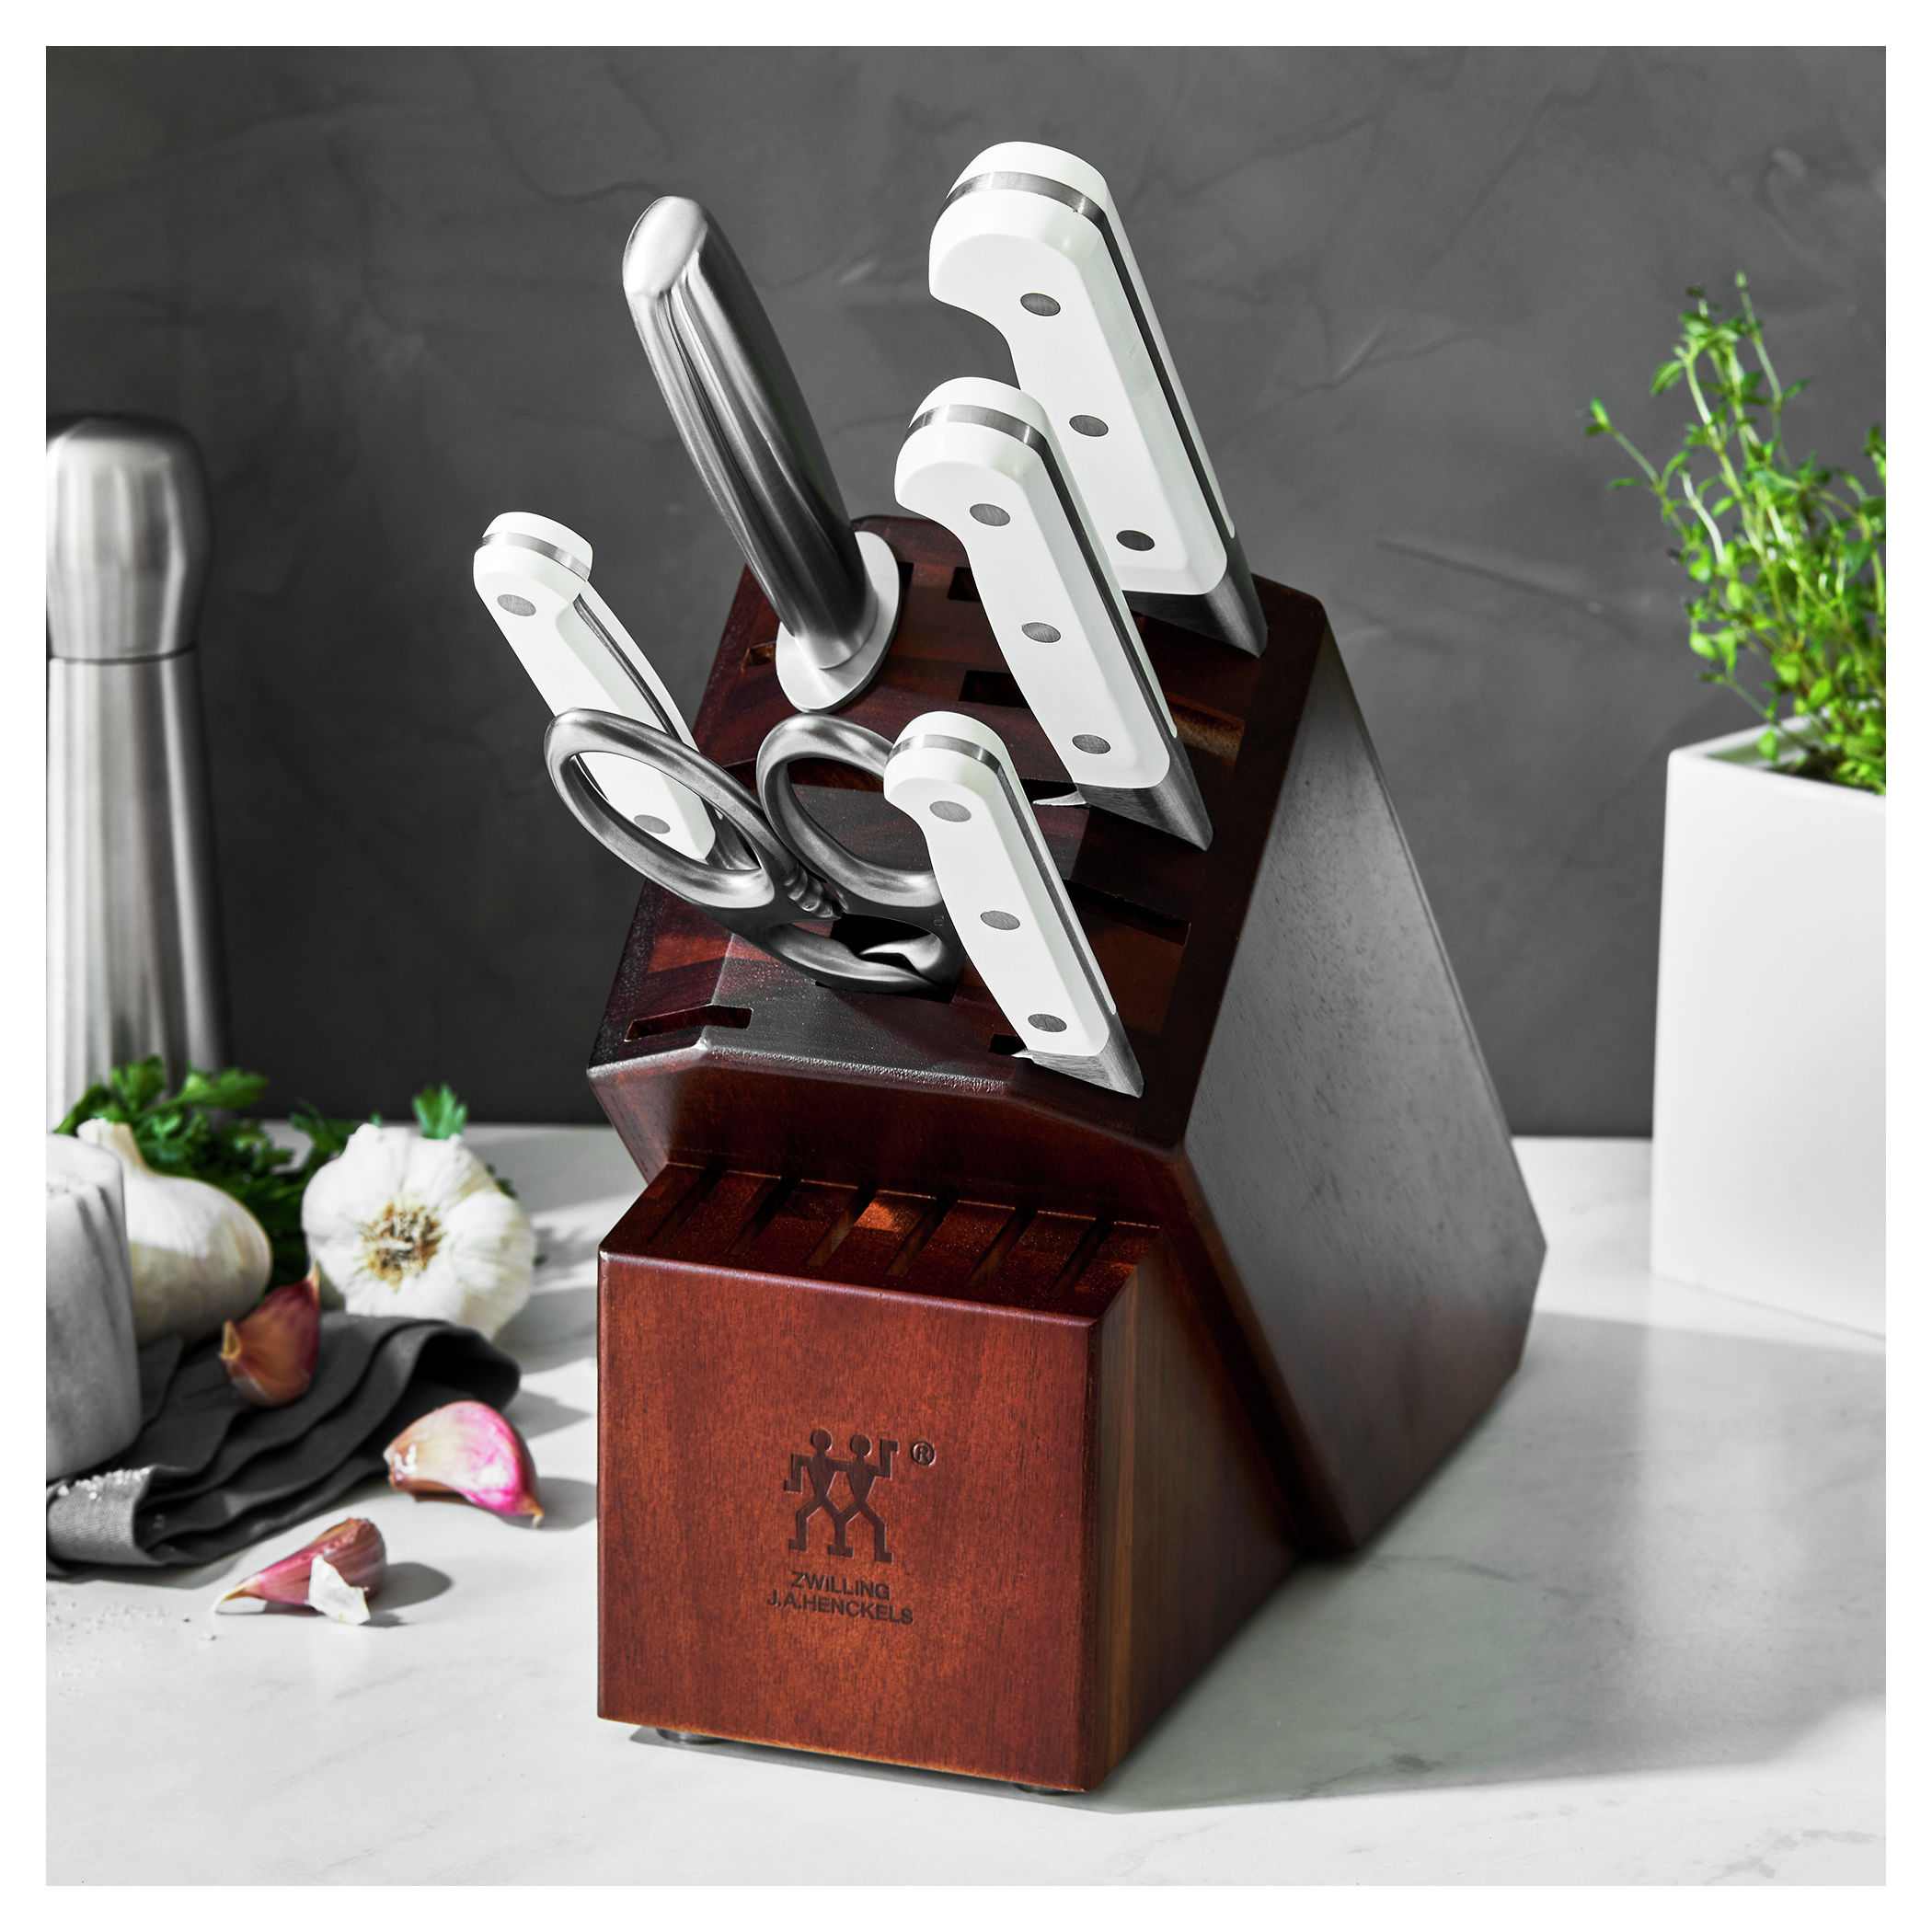 ZWILLING J.A. Henckels Pro 16-Piece Rustic White Knife Block Set 38433-616  - The Home Depot